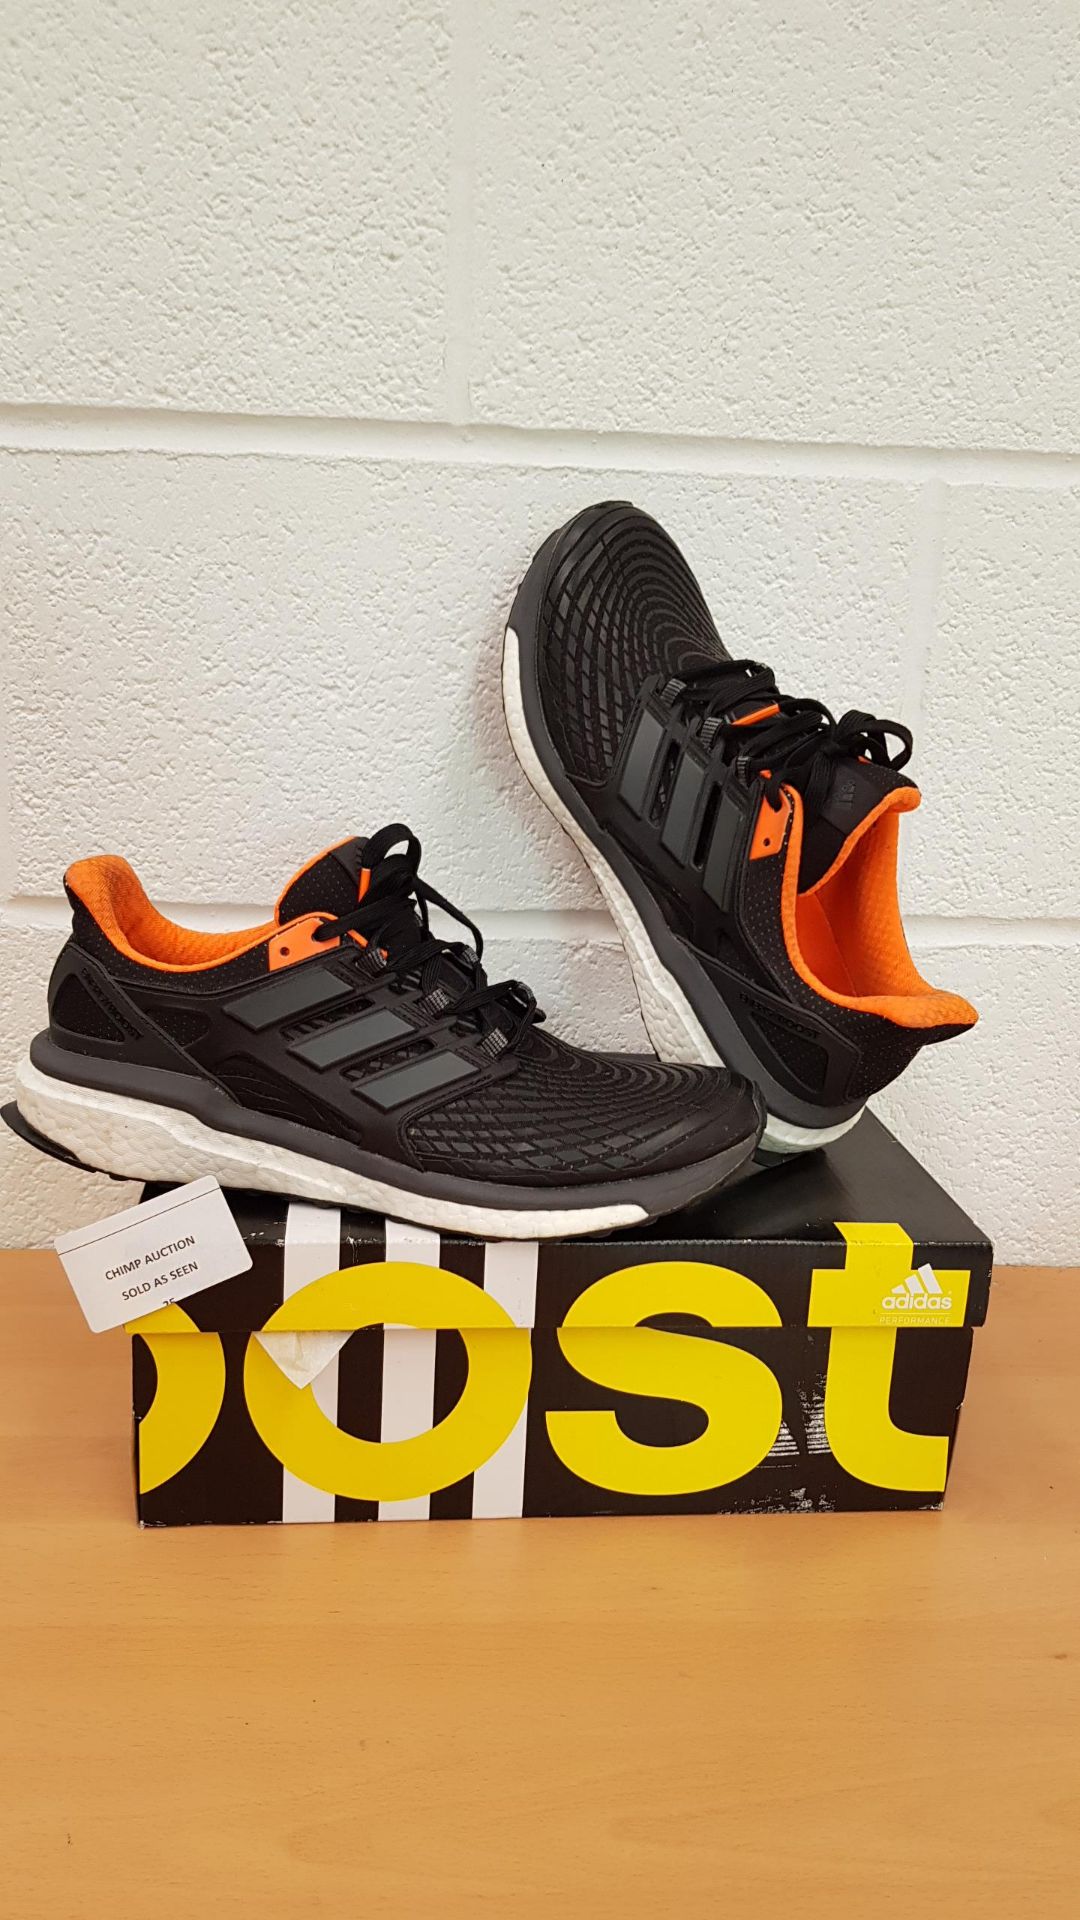 Adidas Men’s Energy Boost M Running Shoes UK SIZE 9.5 RRP £149.99